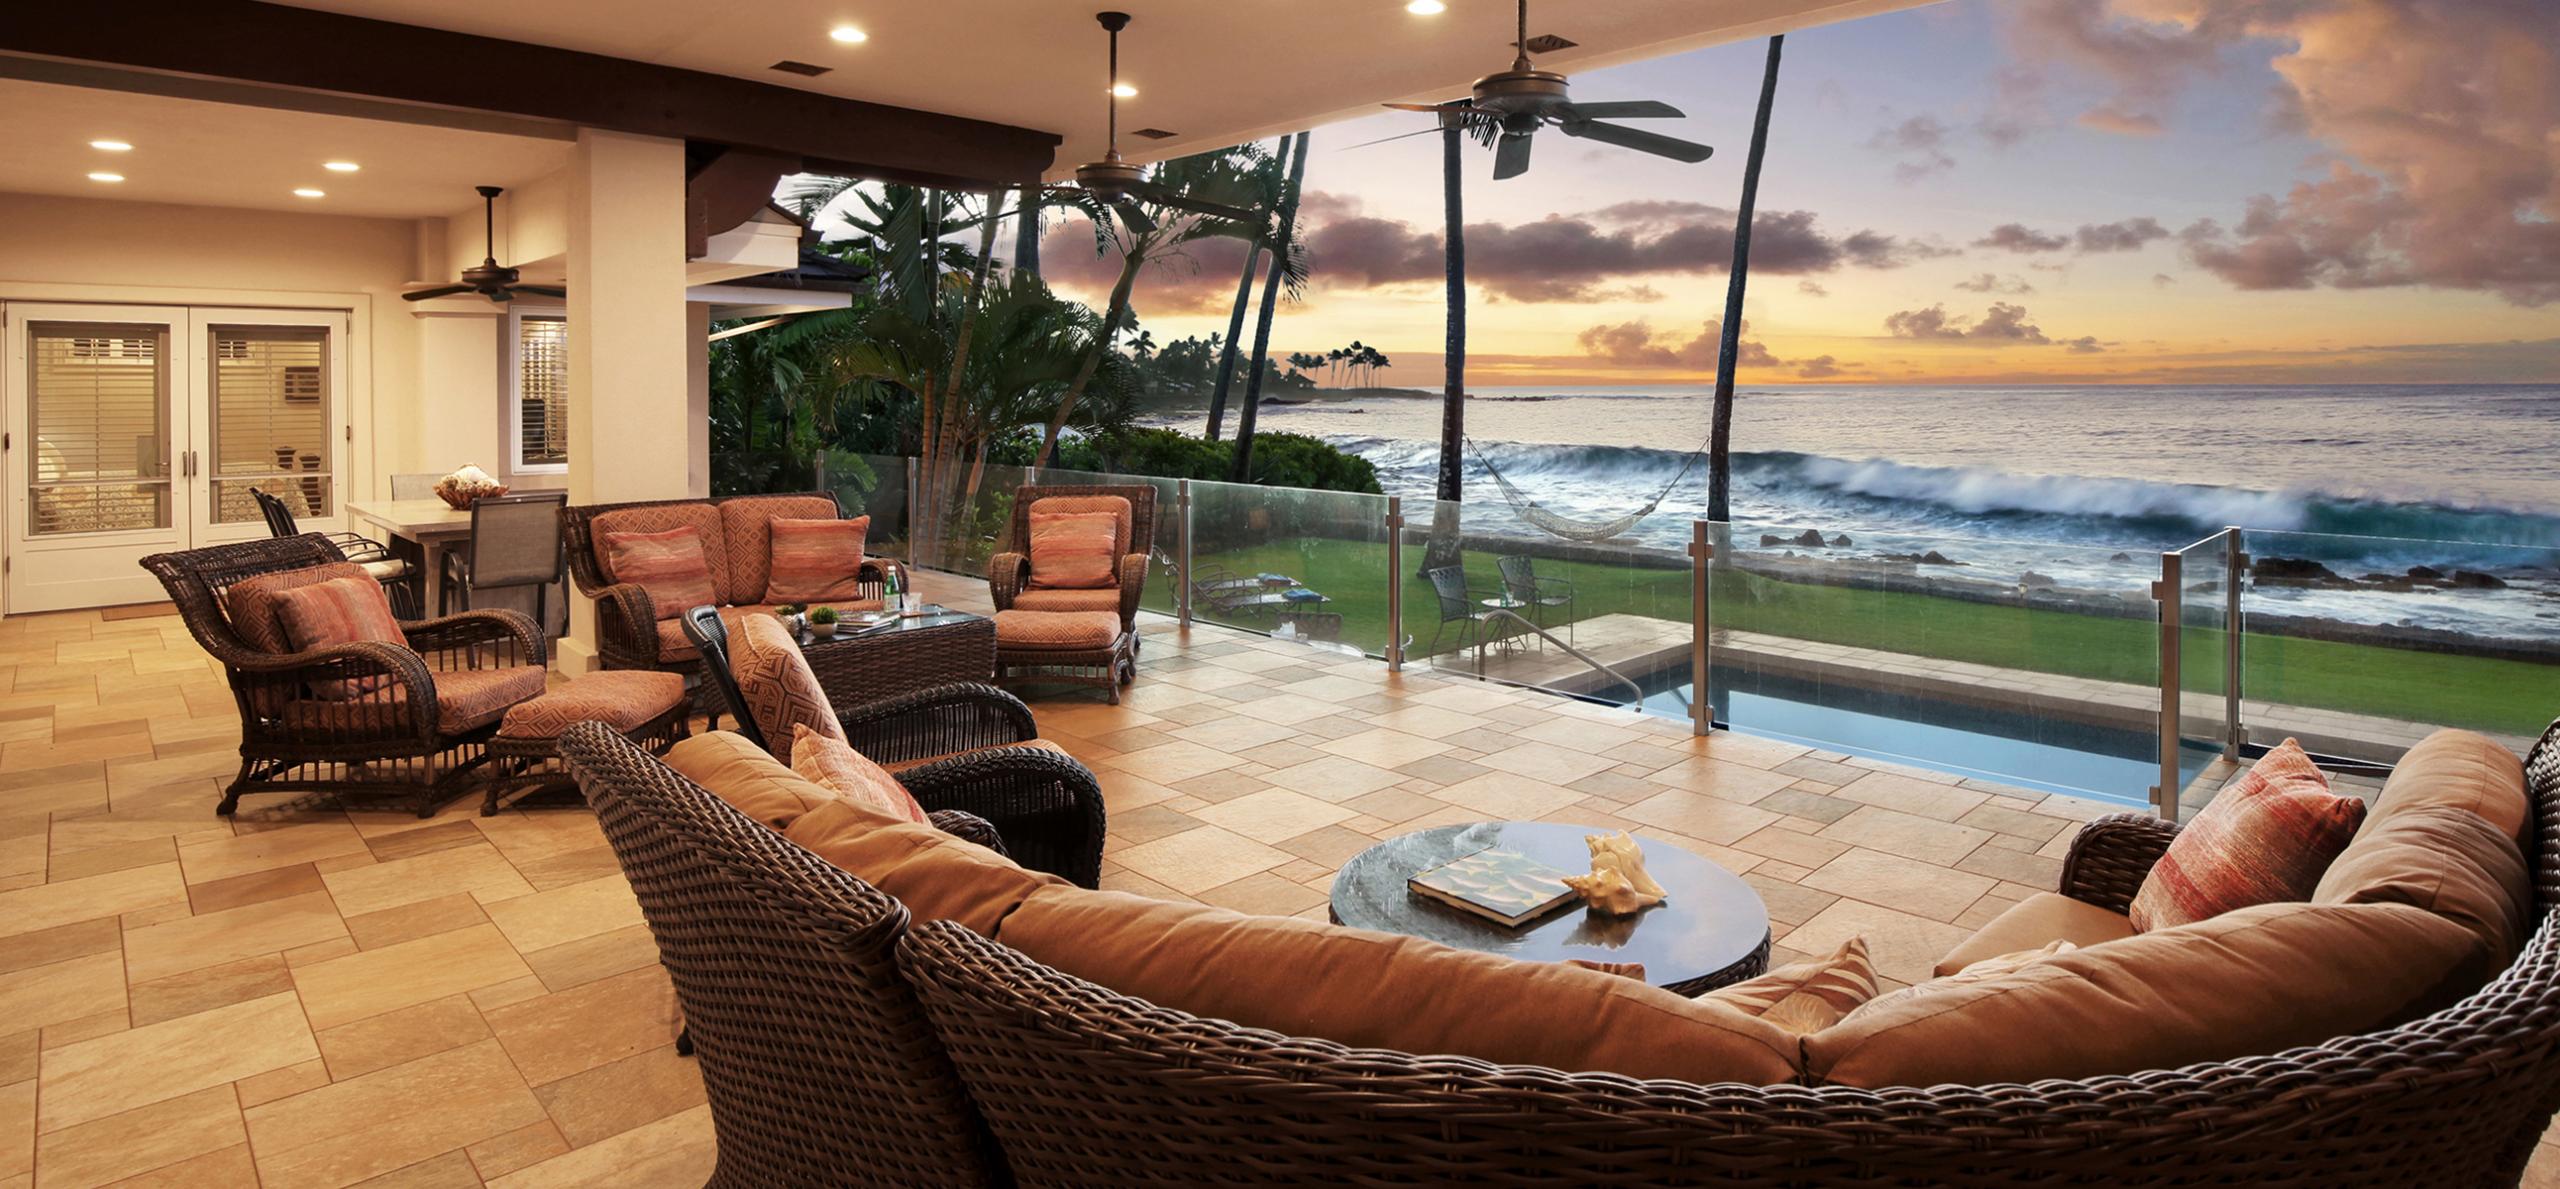 Top 10 Tips To Grow Your vacation rentals